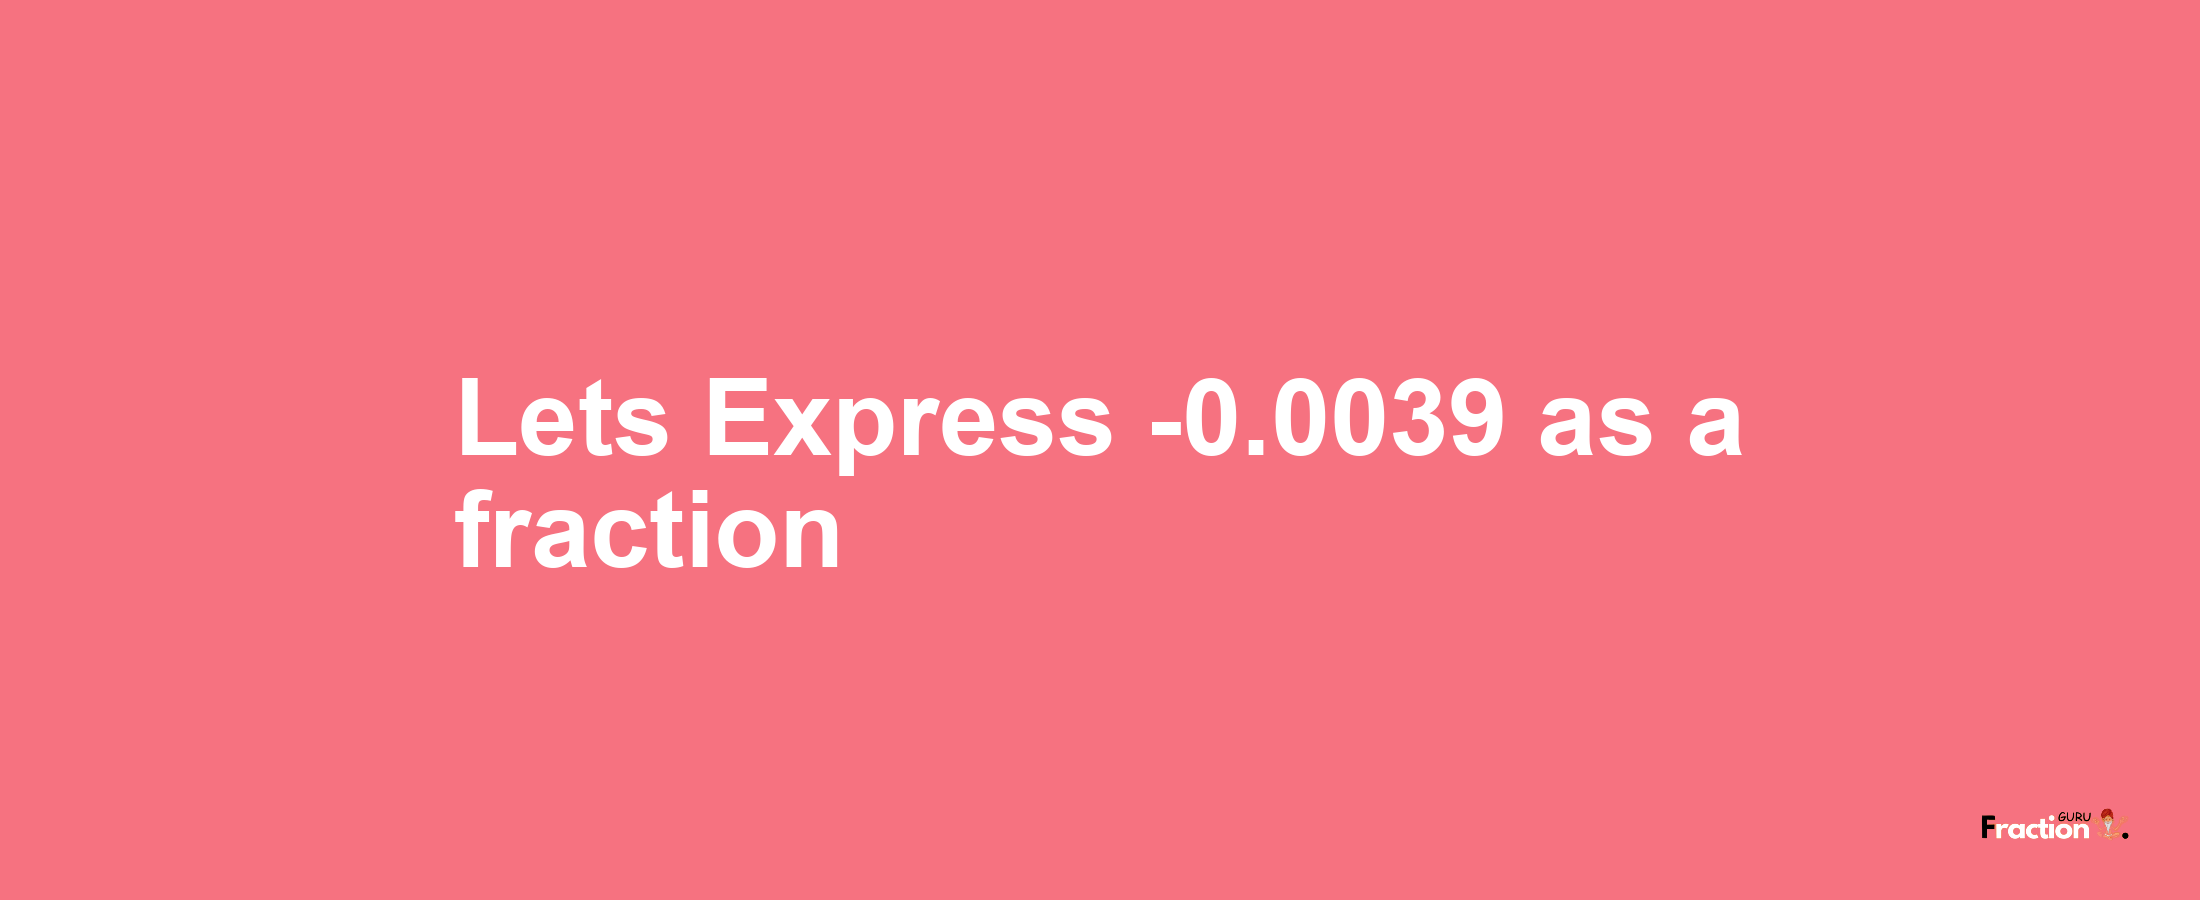 Lets Express -0.0039 as afraction